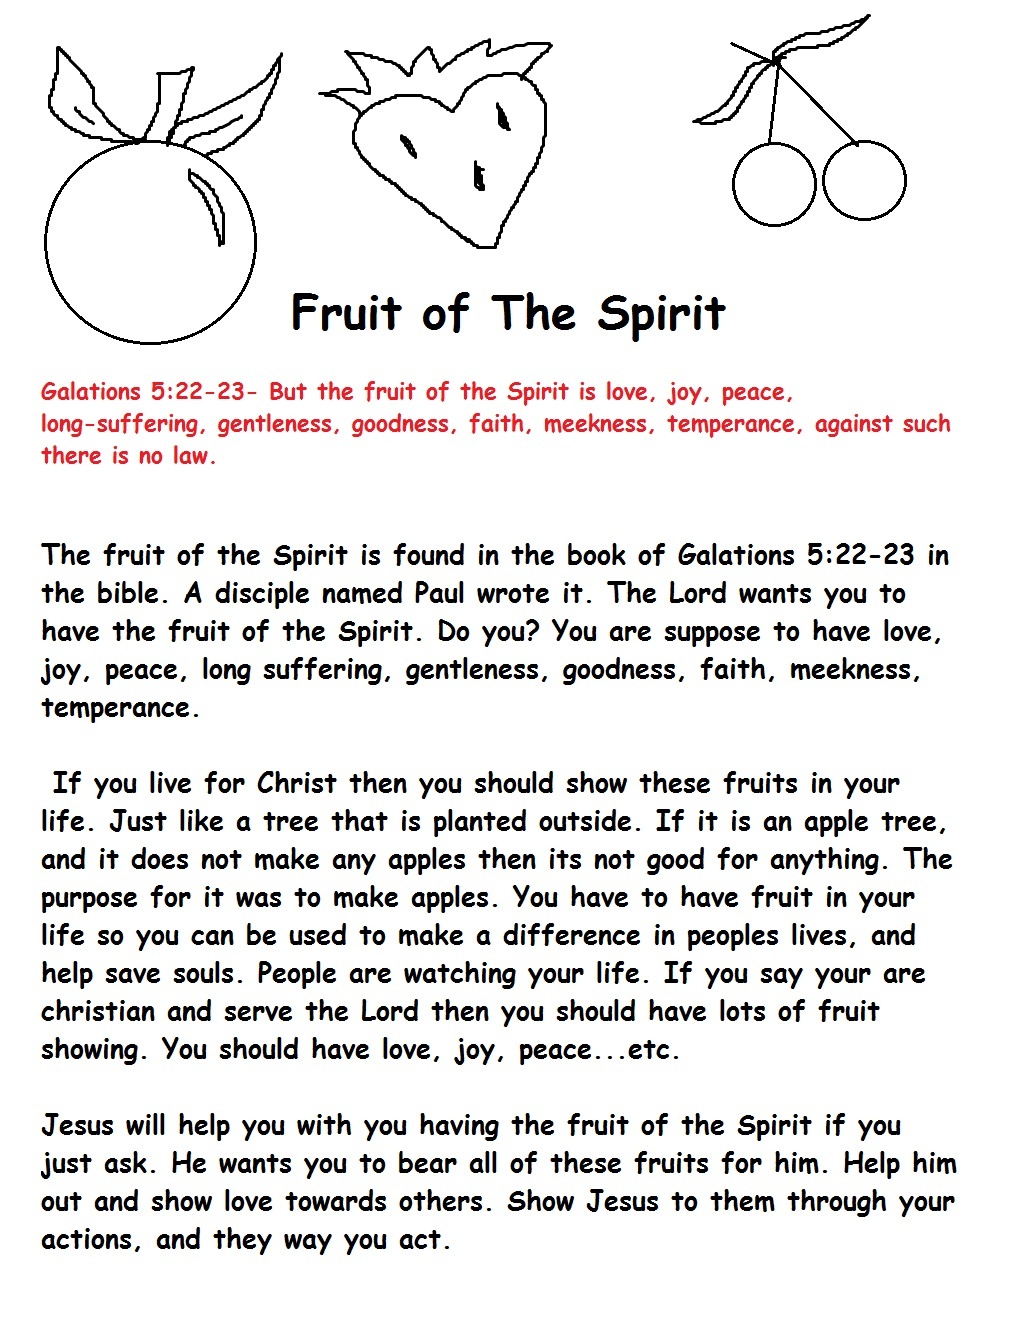 Fruit Of The Spirit Sunday School Lesson - Free Printable Sunday School Lessons For Kids